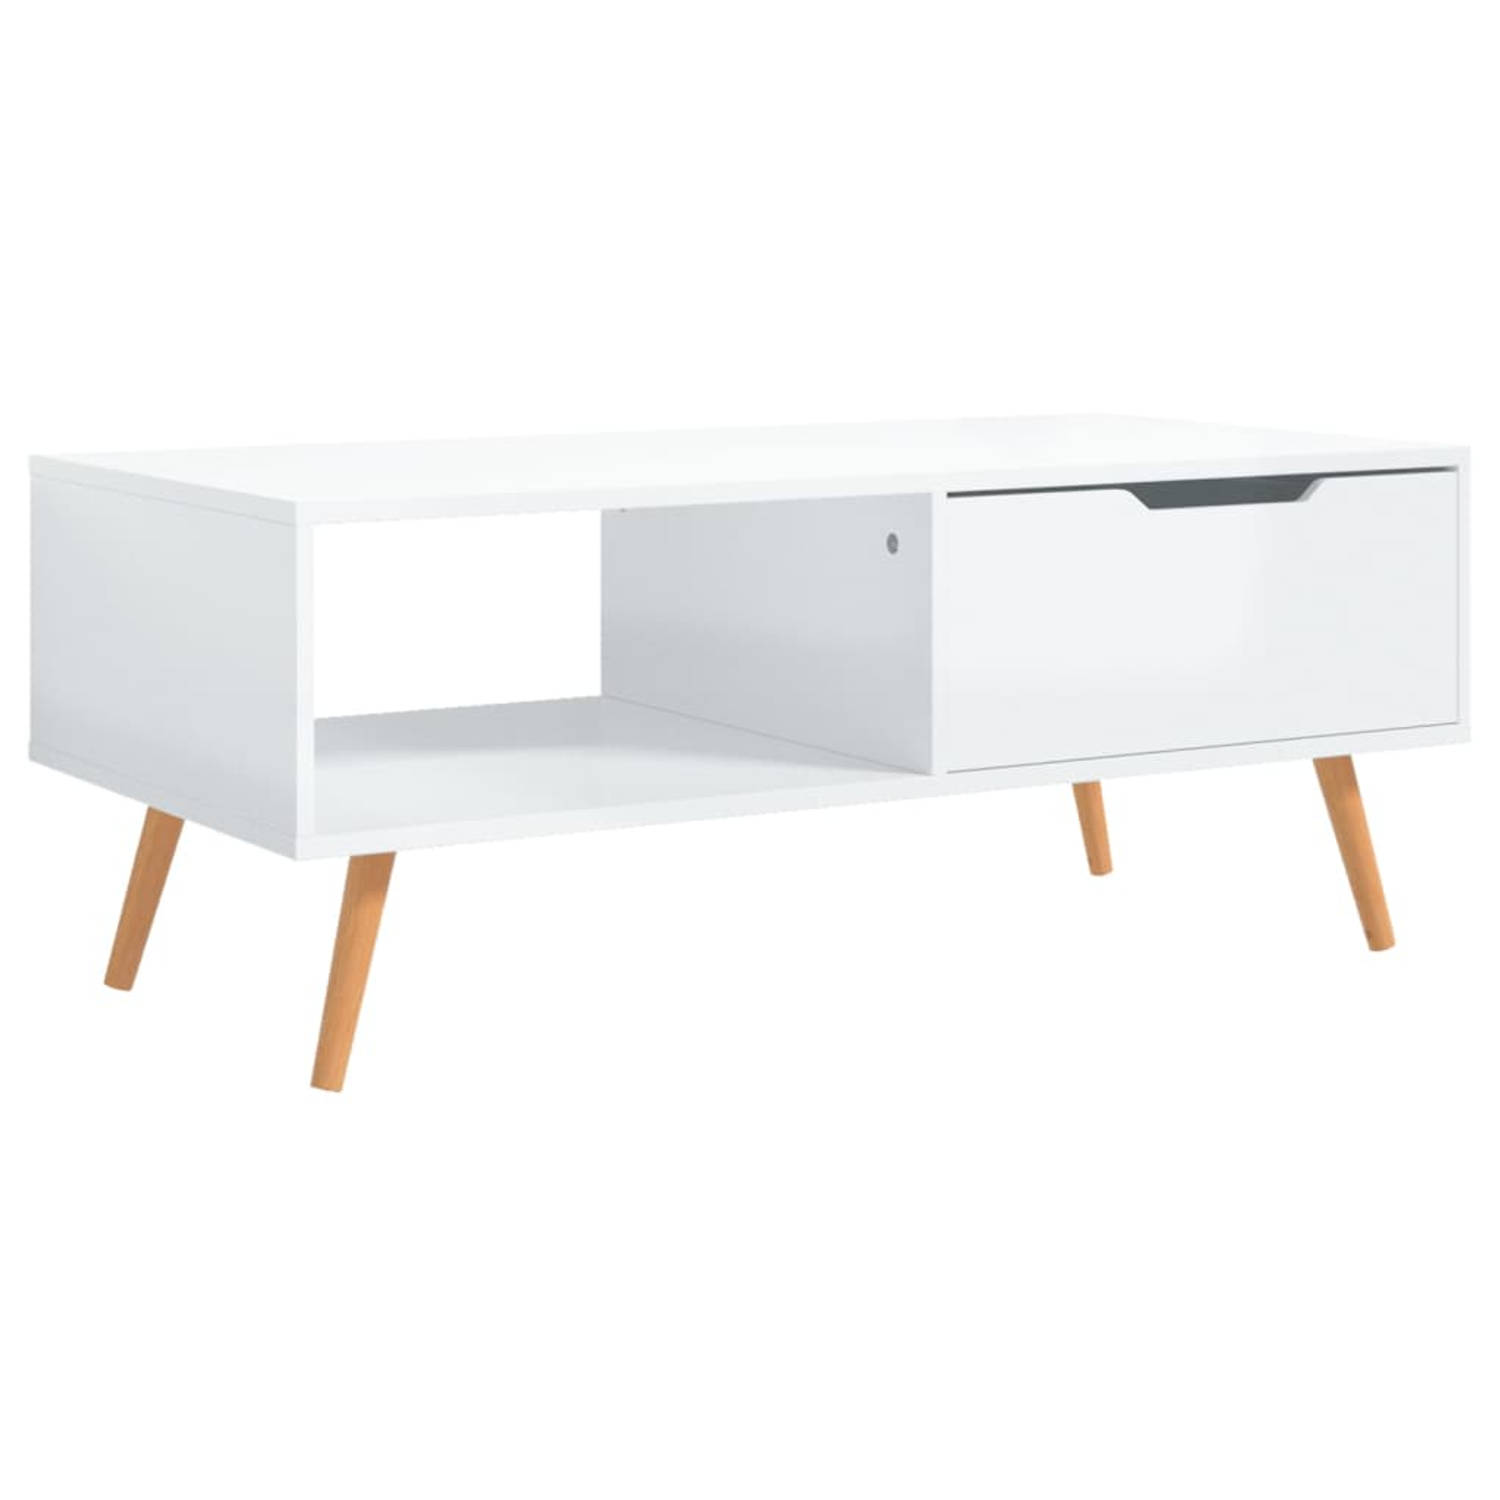 The Living Store Salontafel Woonkamer 100 x 49.5 x 43 cm Hoogglans Wit